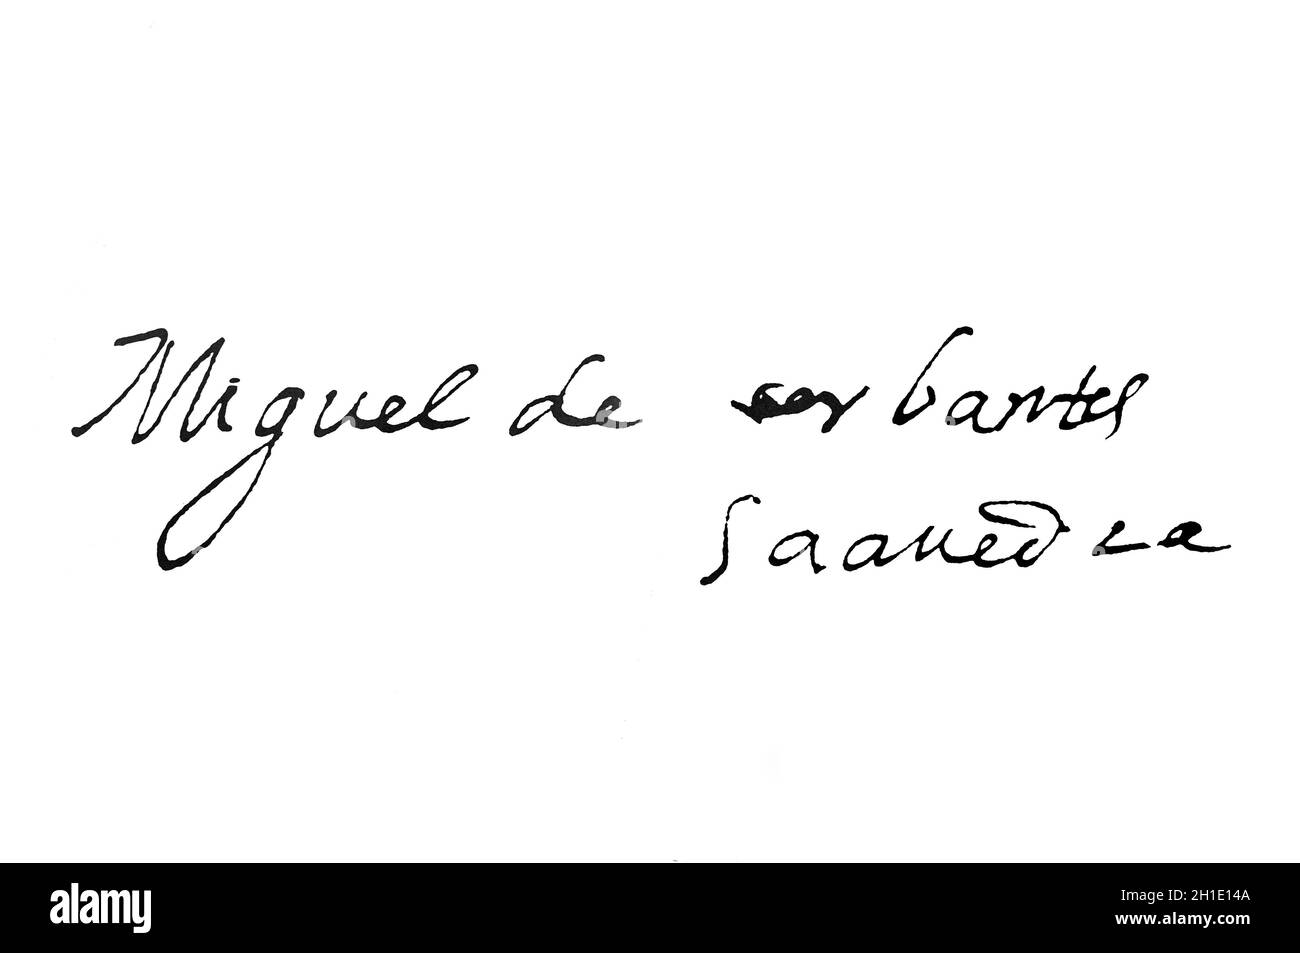 Miguel de Cervantes Saavedra signature, the greatest writer in the Spanish language. Isolated Stock Photo